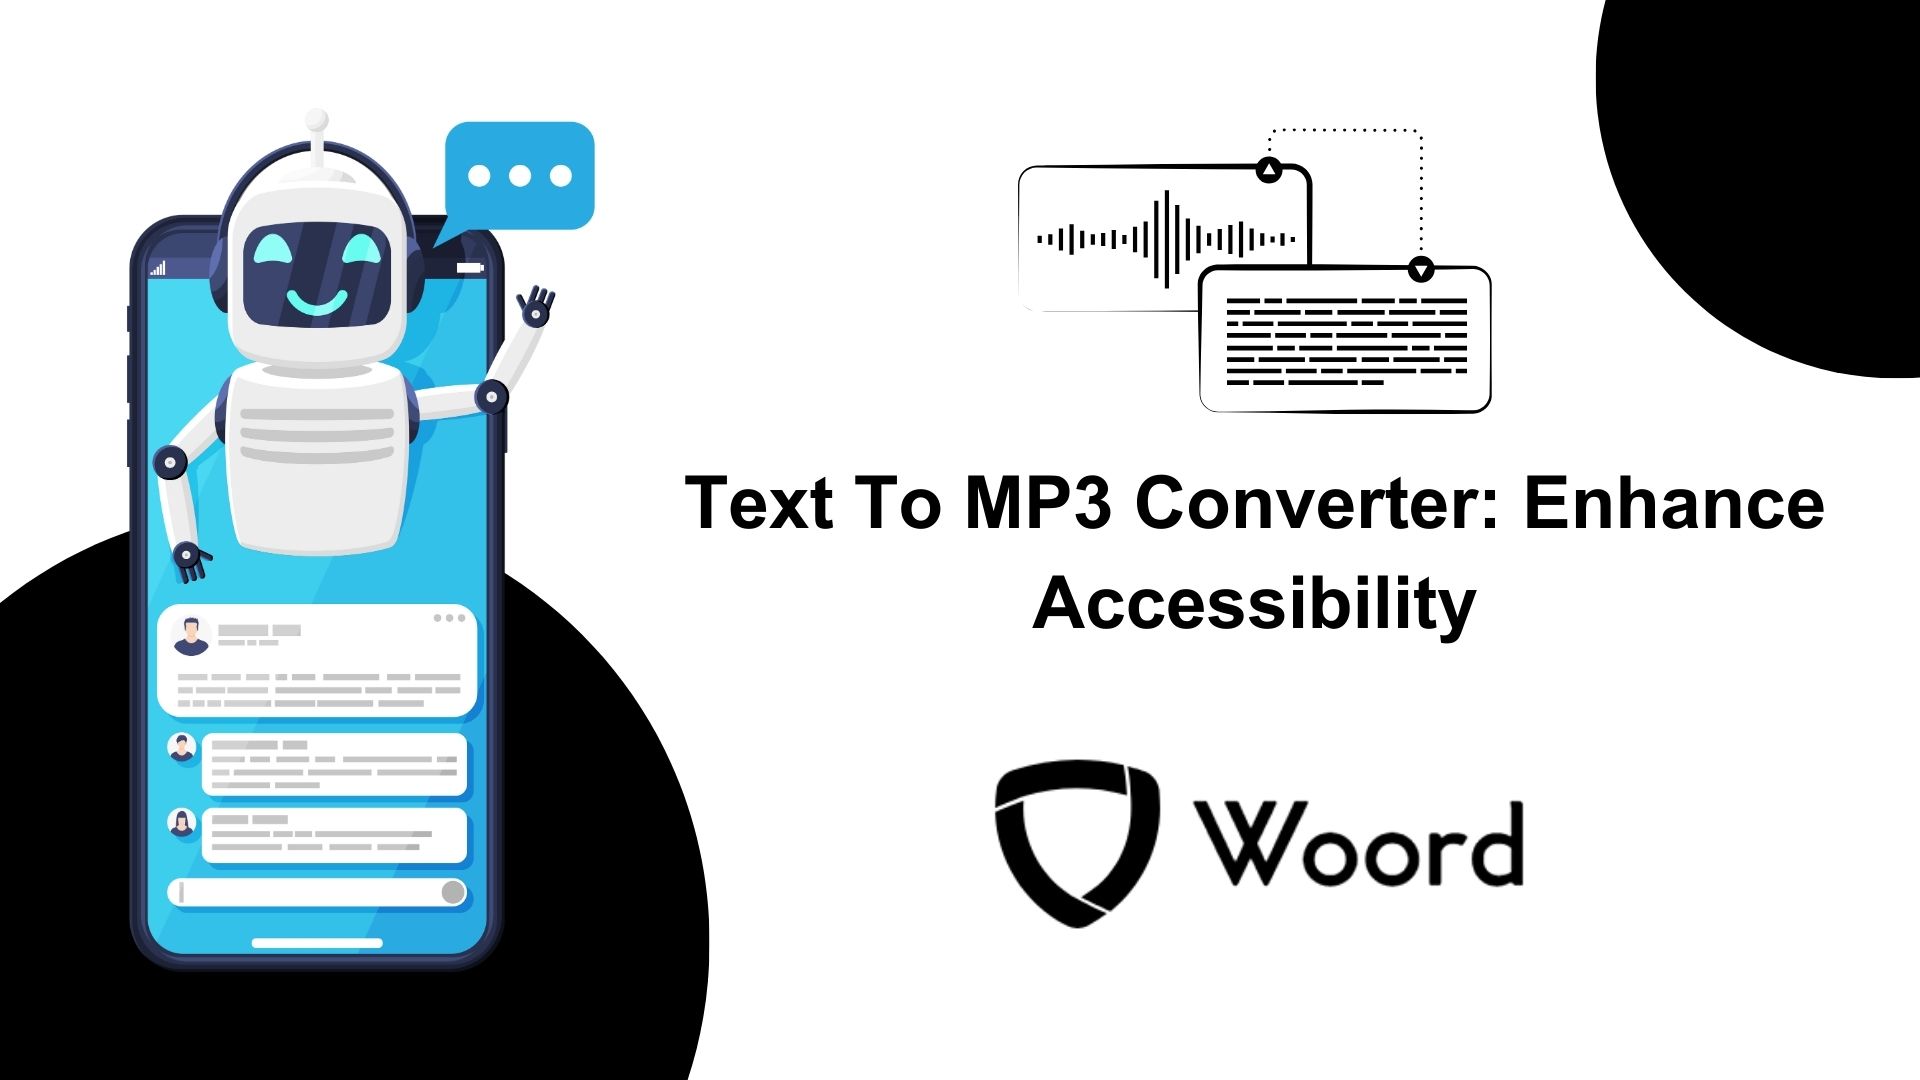 Text To MP3 Converter: Enhance Accessibility